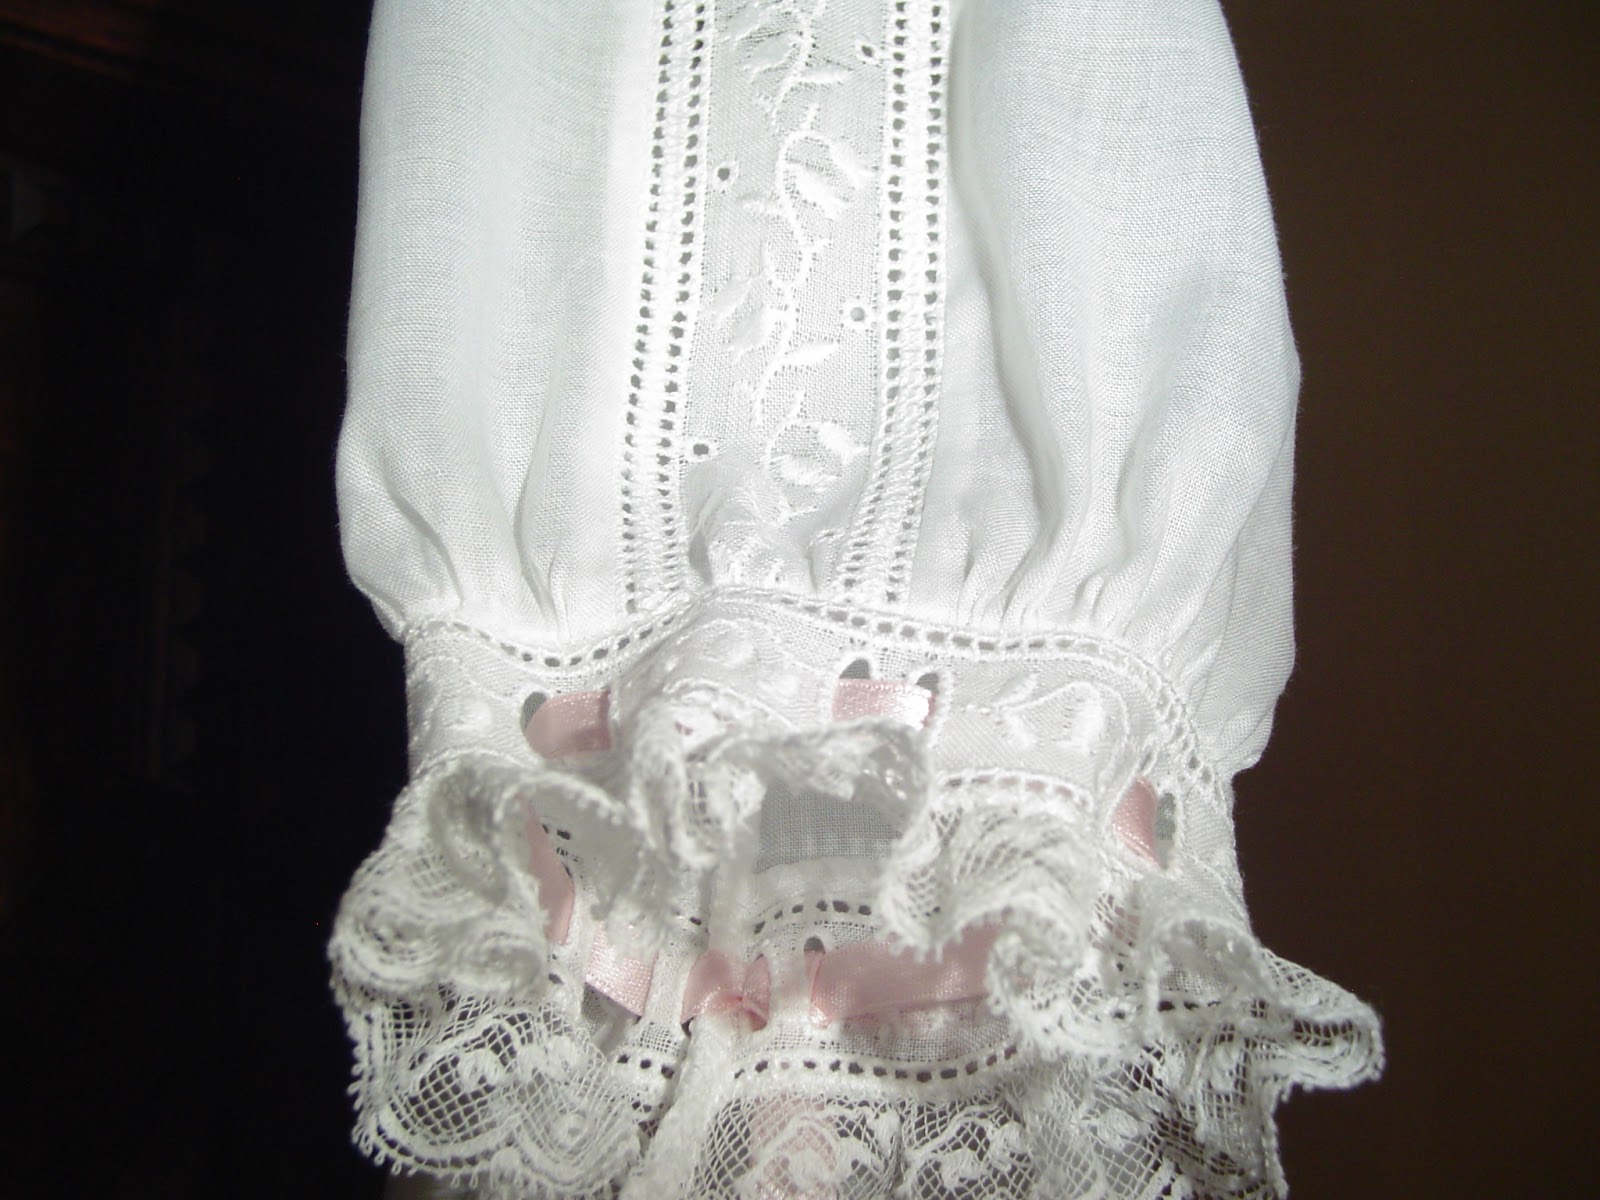 MidnightOilSmockers: Christening Gown Show and Share